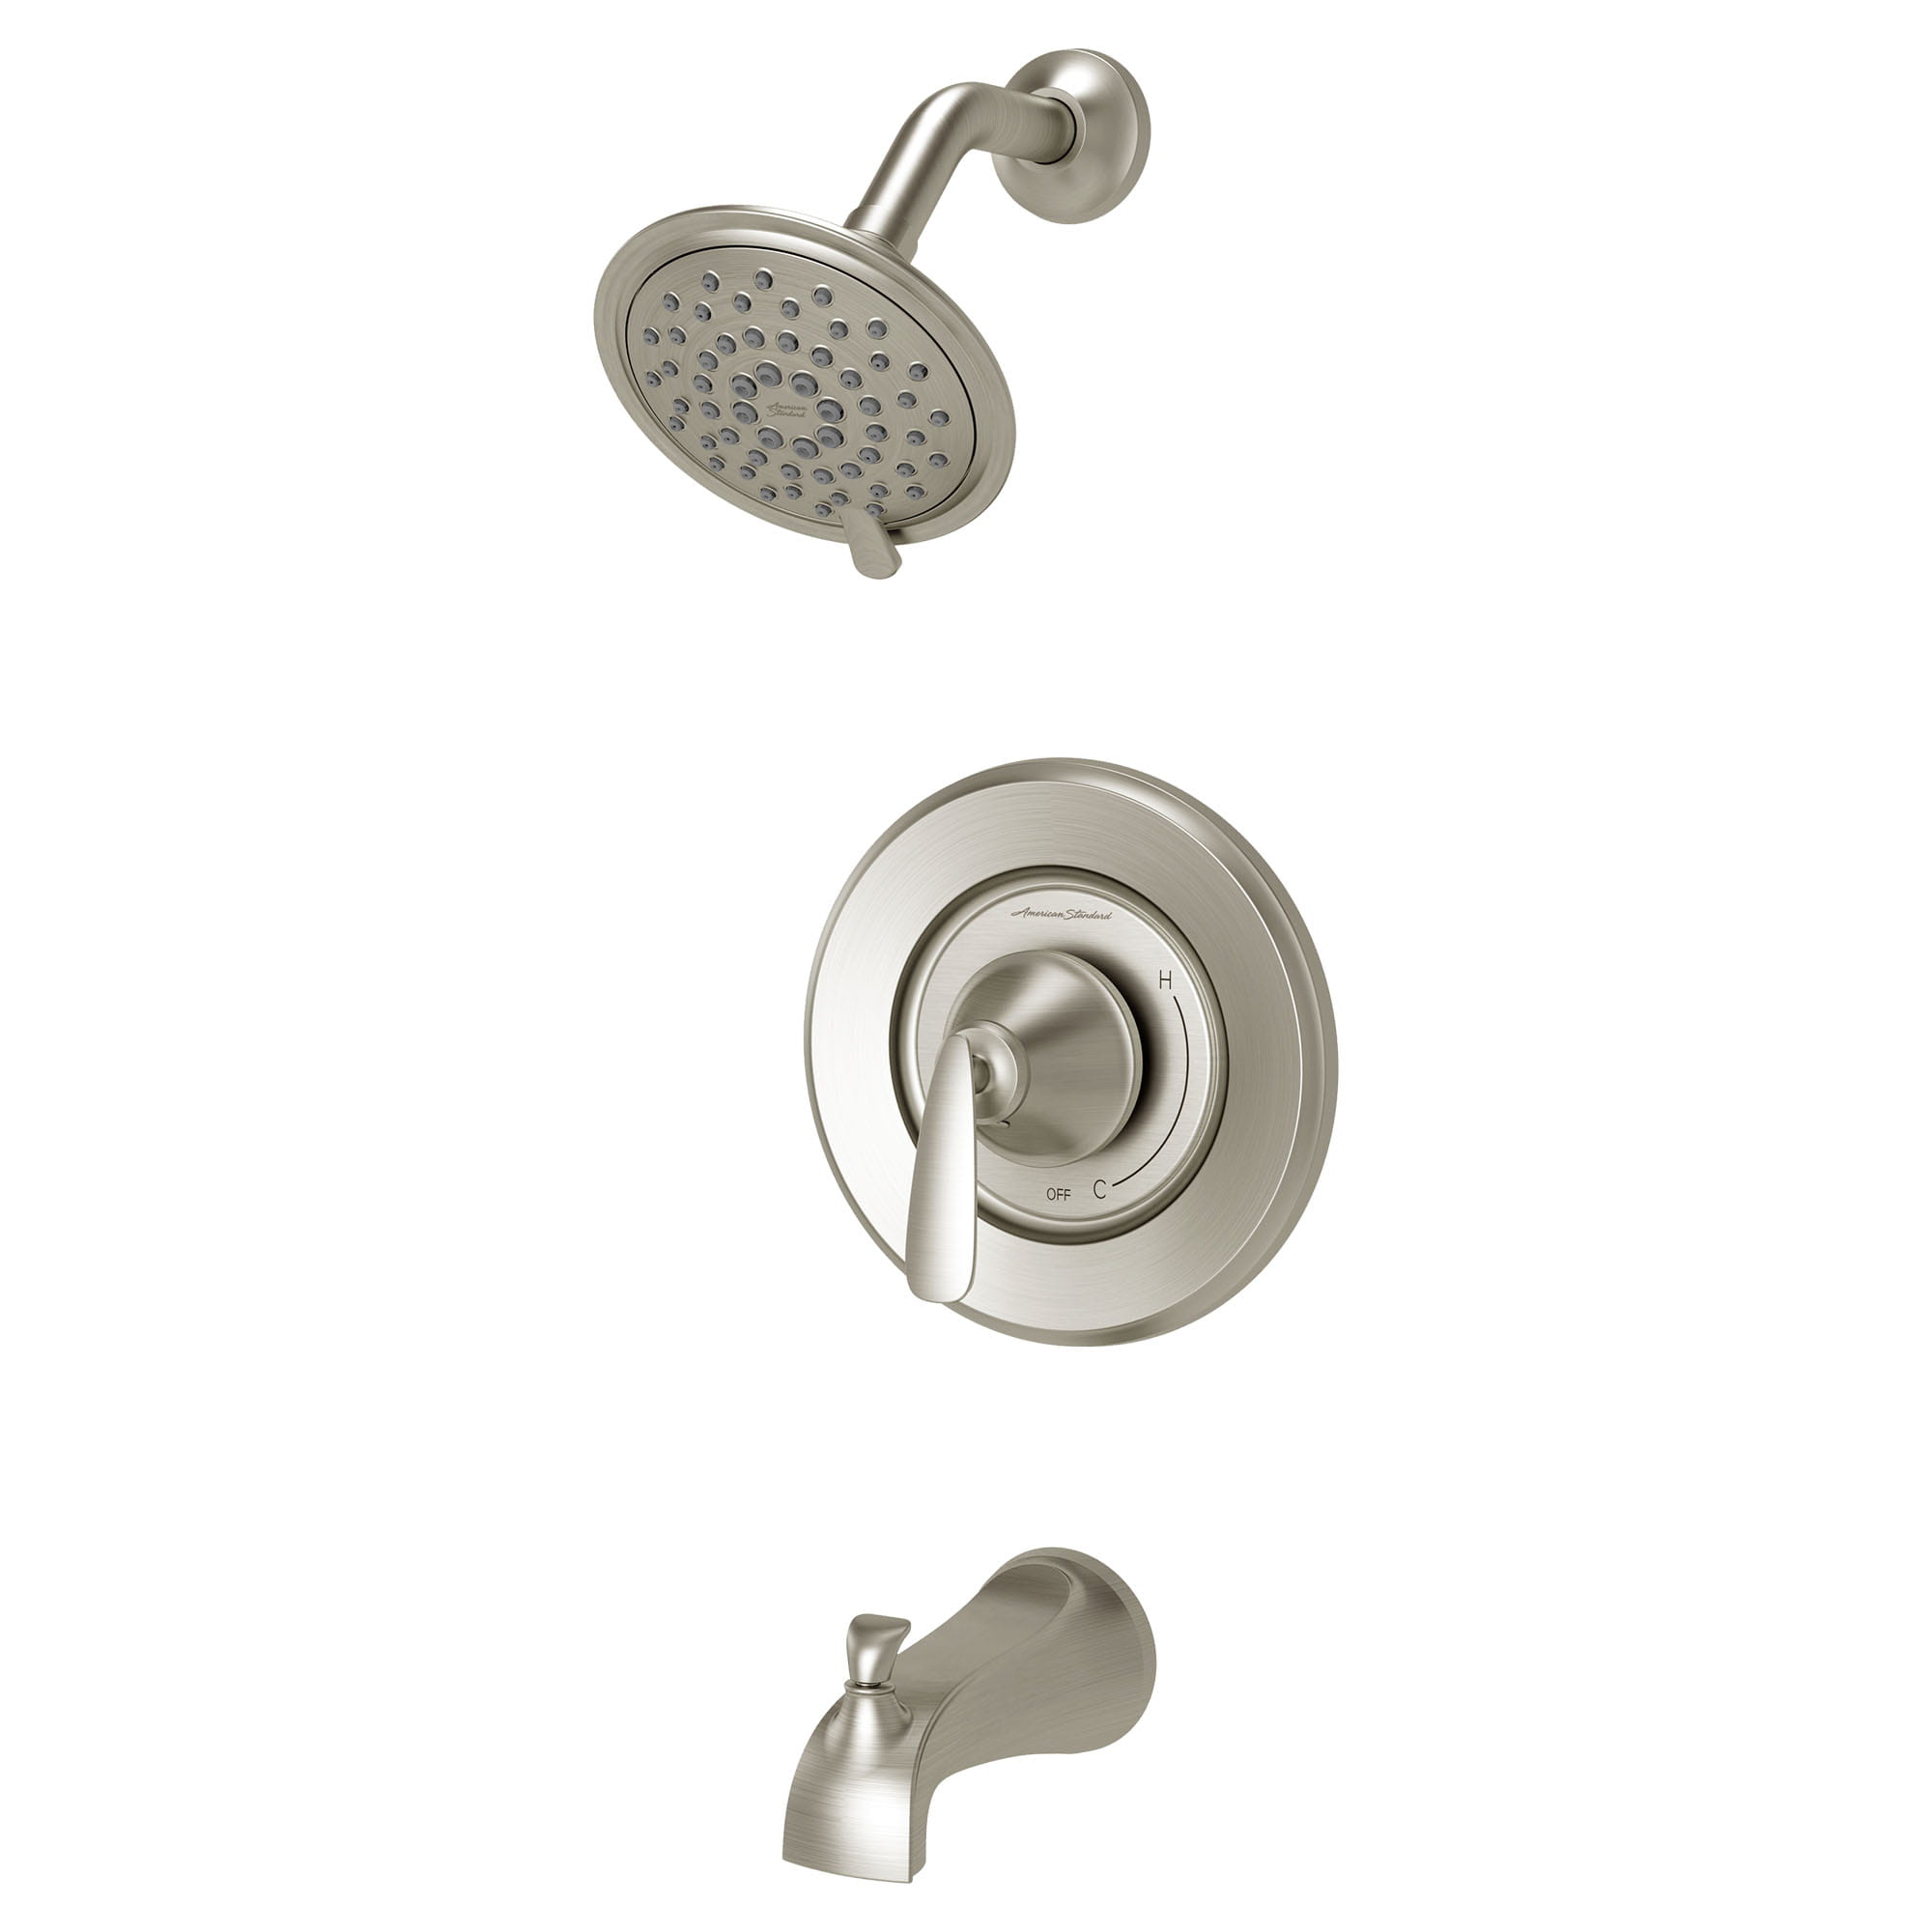 Somerville 18 GPM Tub and Shower Trim Kit with Ceramic Disc Valve Cartridge and Lever Handle BRUSHED NICKEL